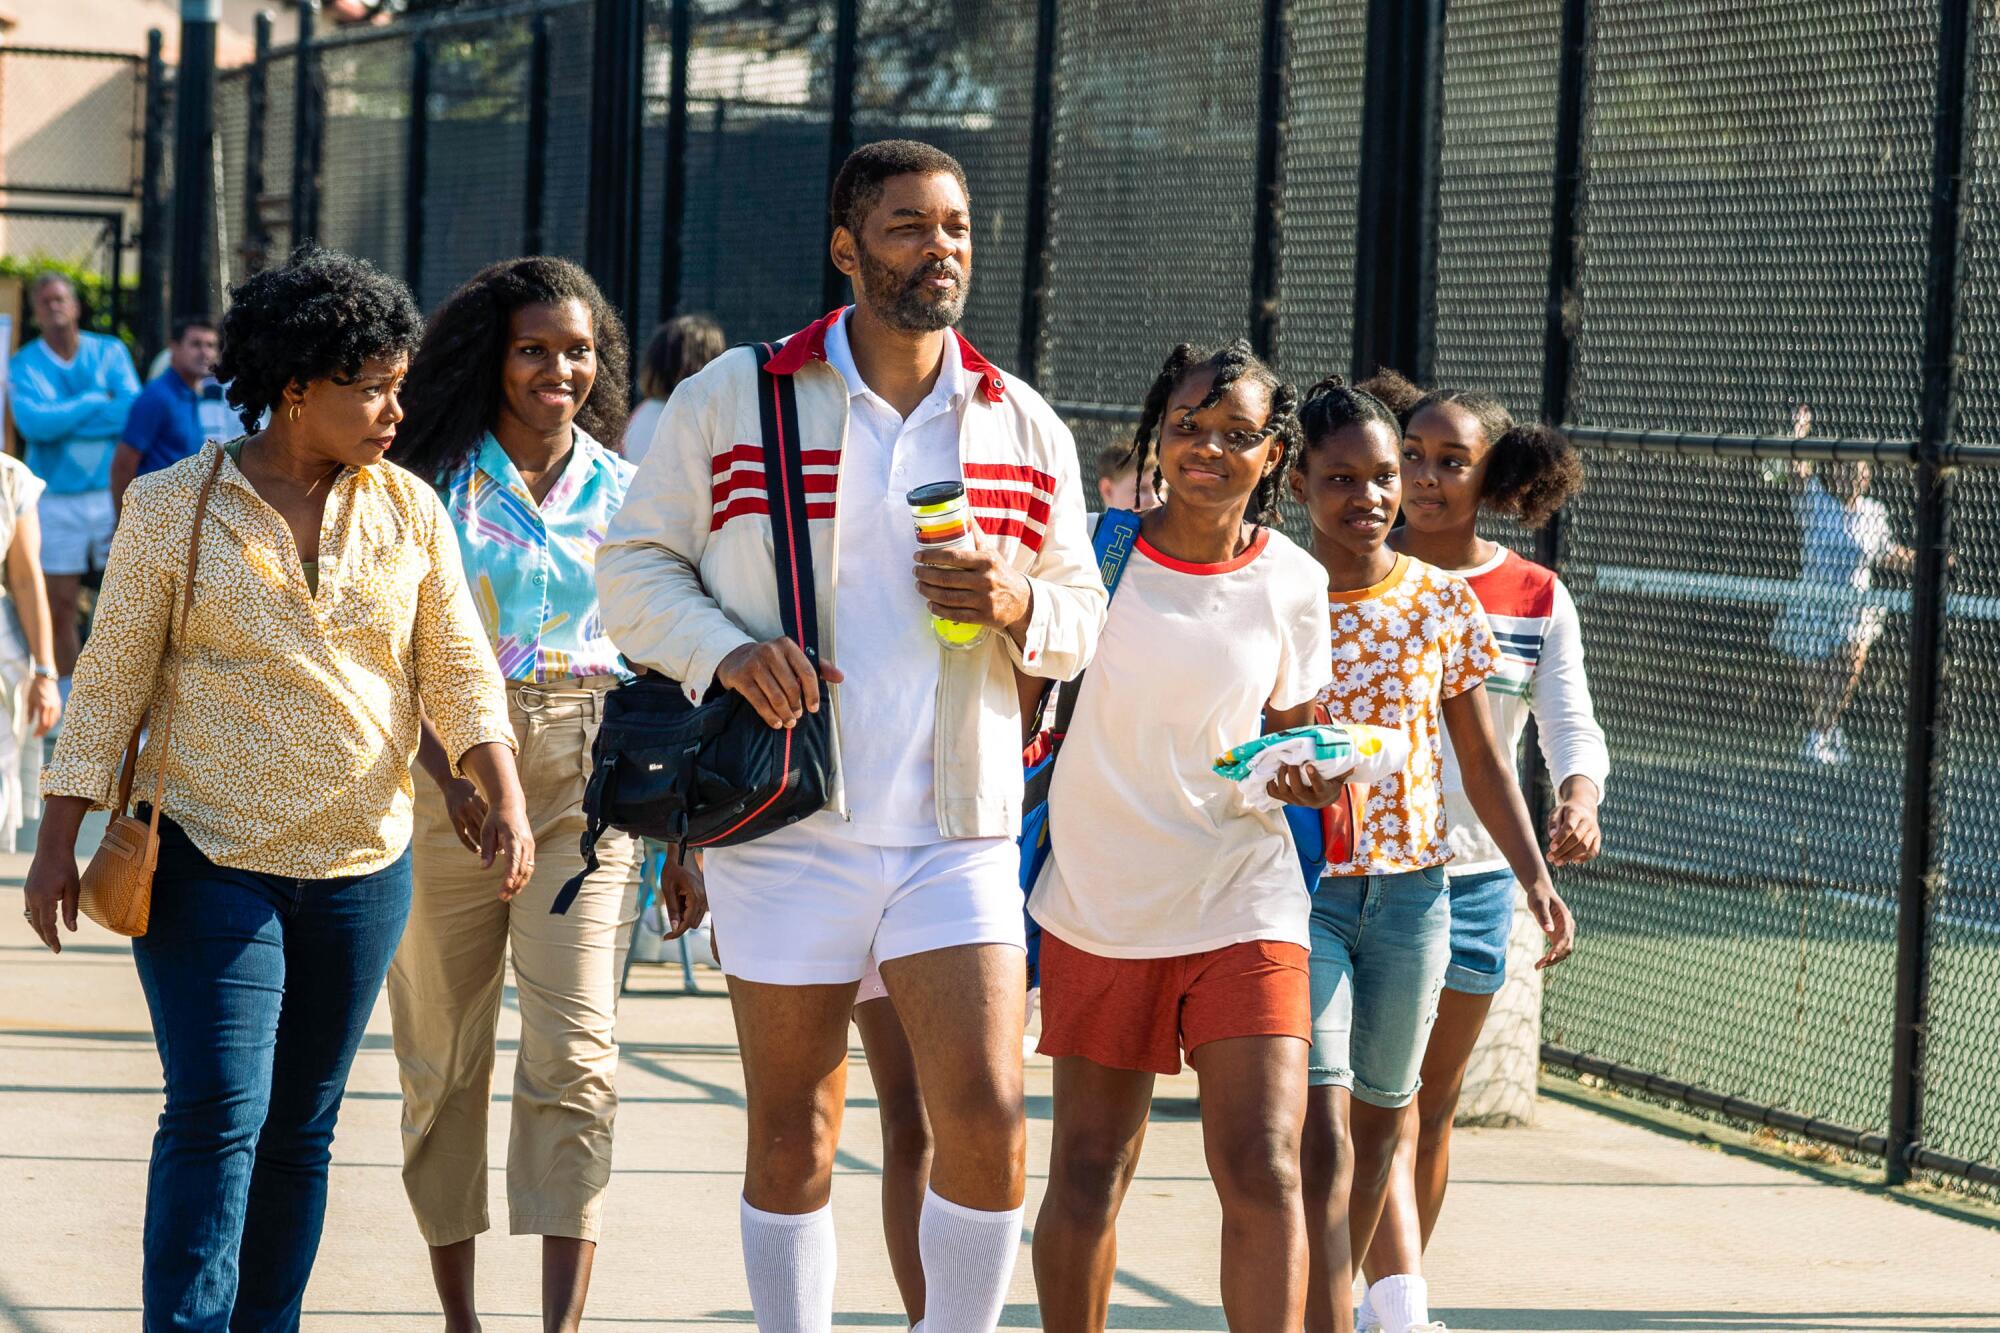 Aunjanue Ellis and Will Smith walk with their girls near tennis courts in a scene from "King Richard."